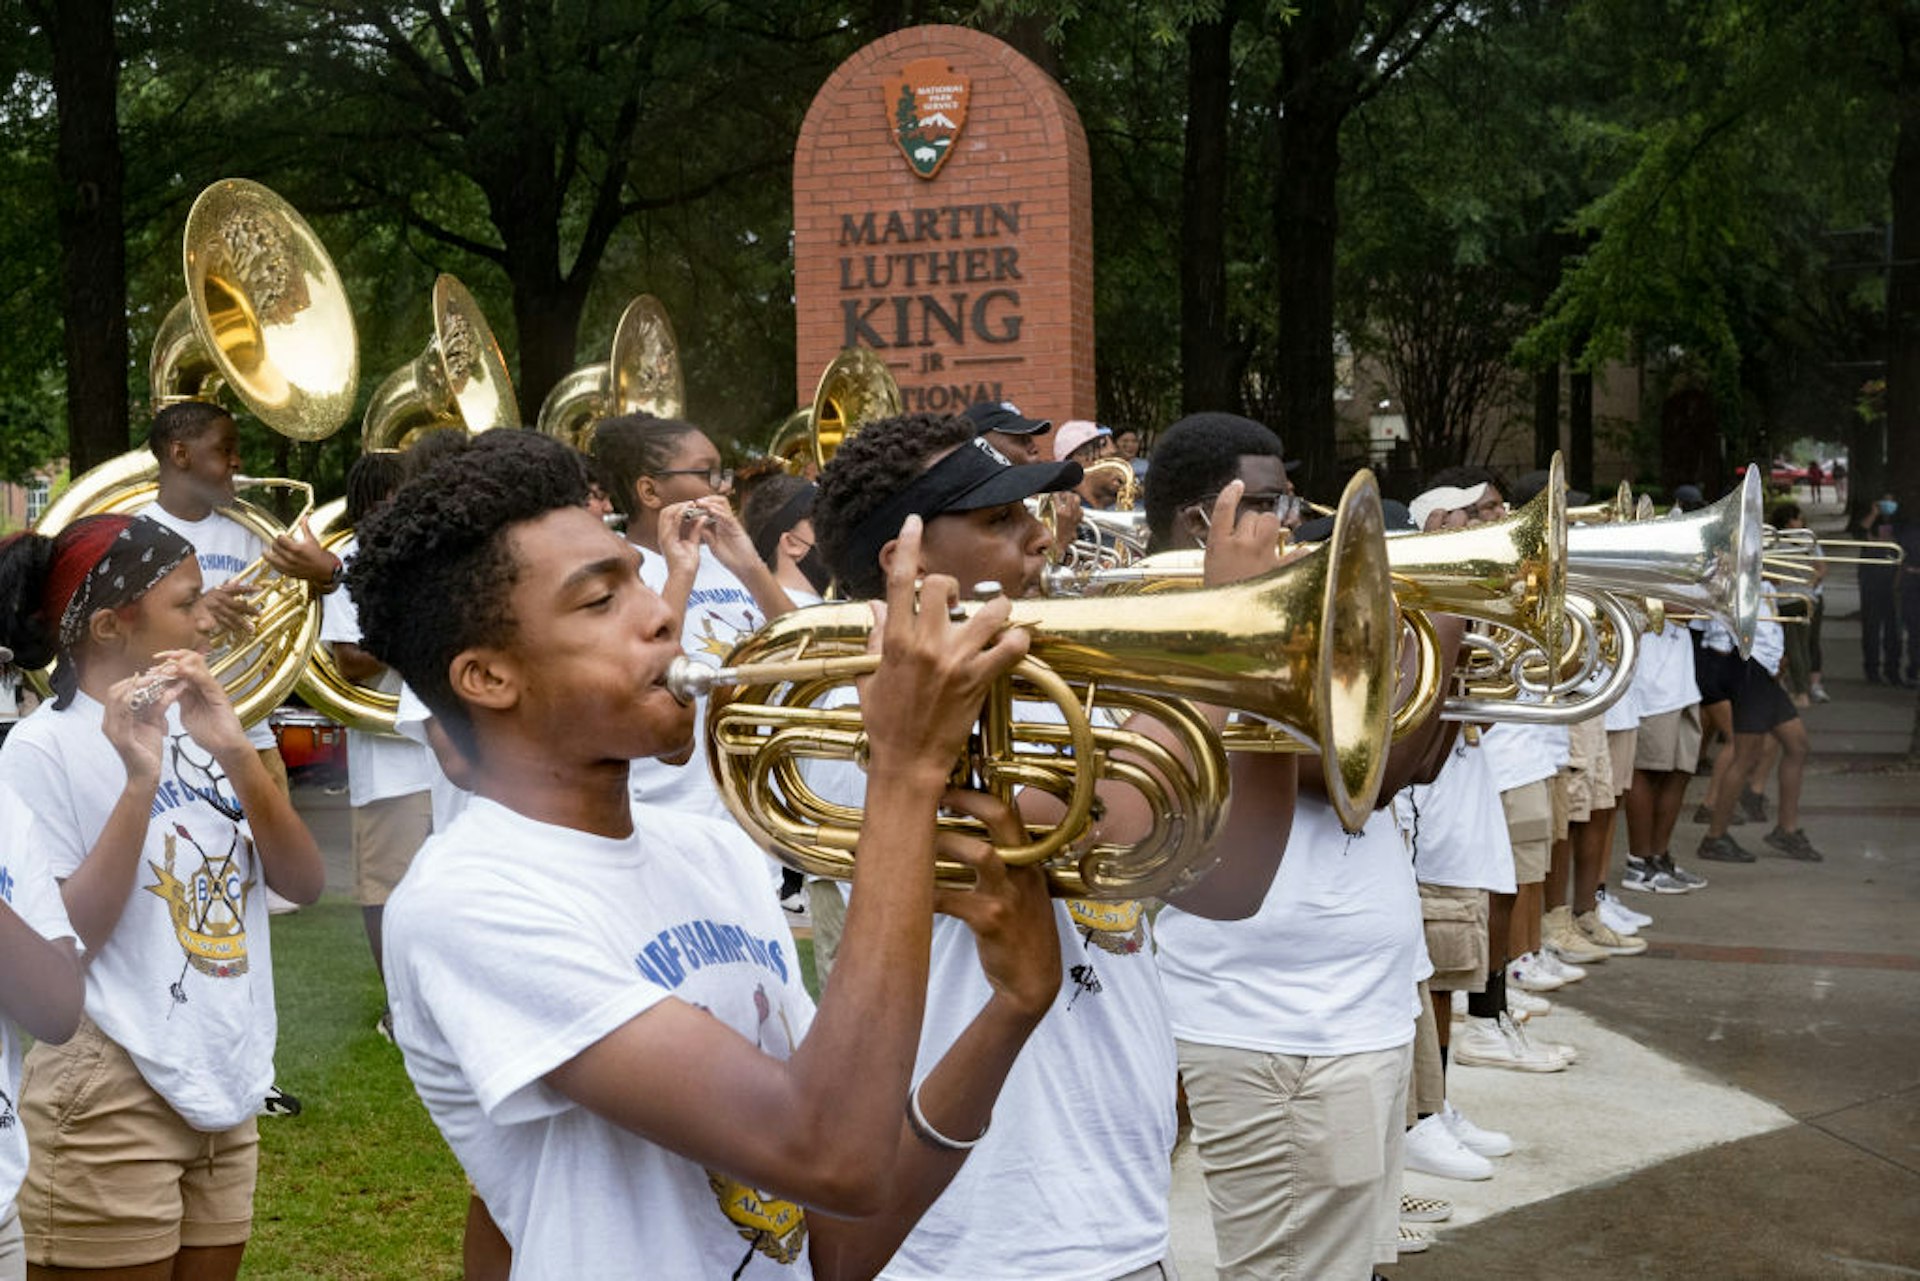 A band plays in front of the Martin Luther King Junior Center before participating in a parade to celebrate Juneteenth on June 19, 2021 in Atlanta, Georgia, USA